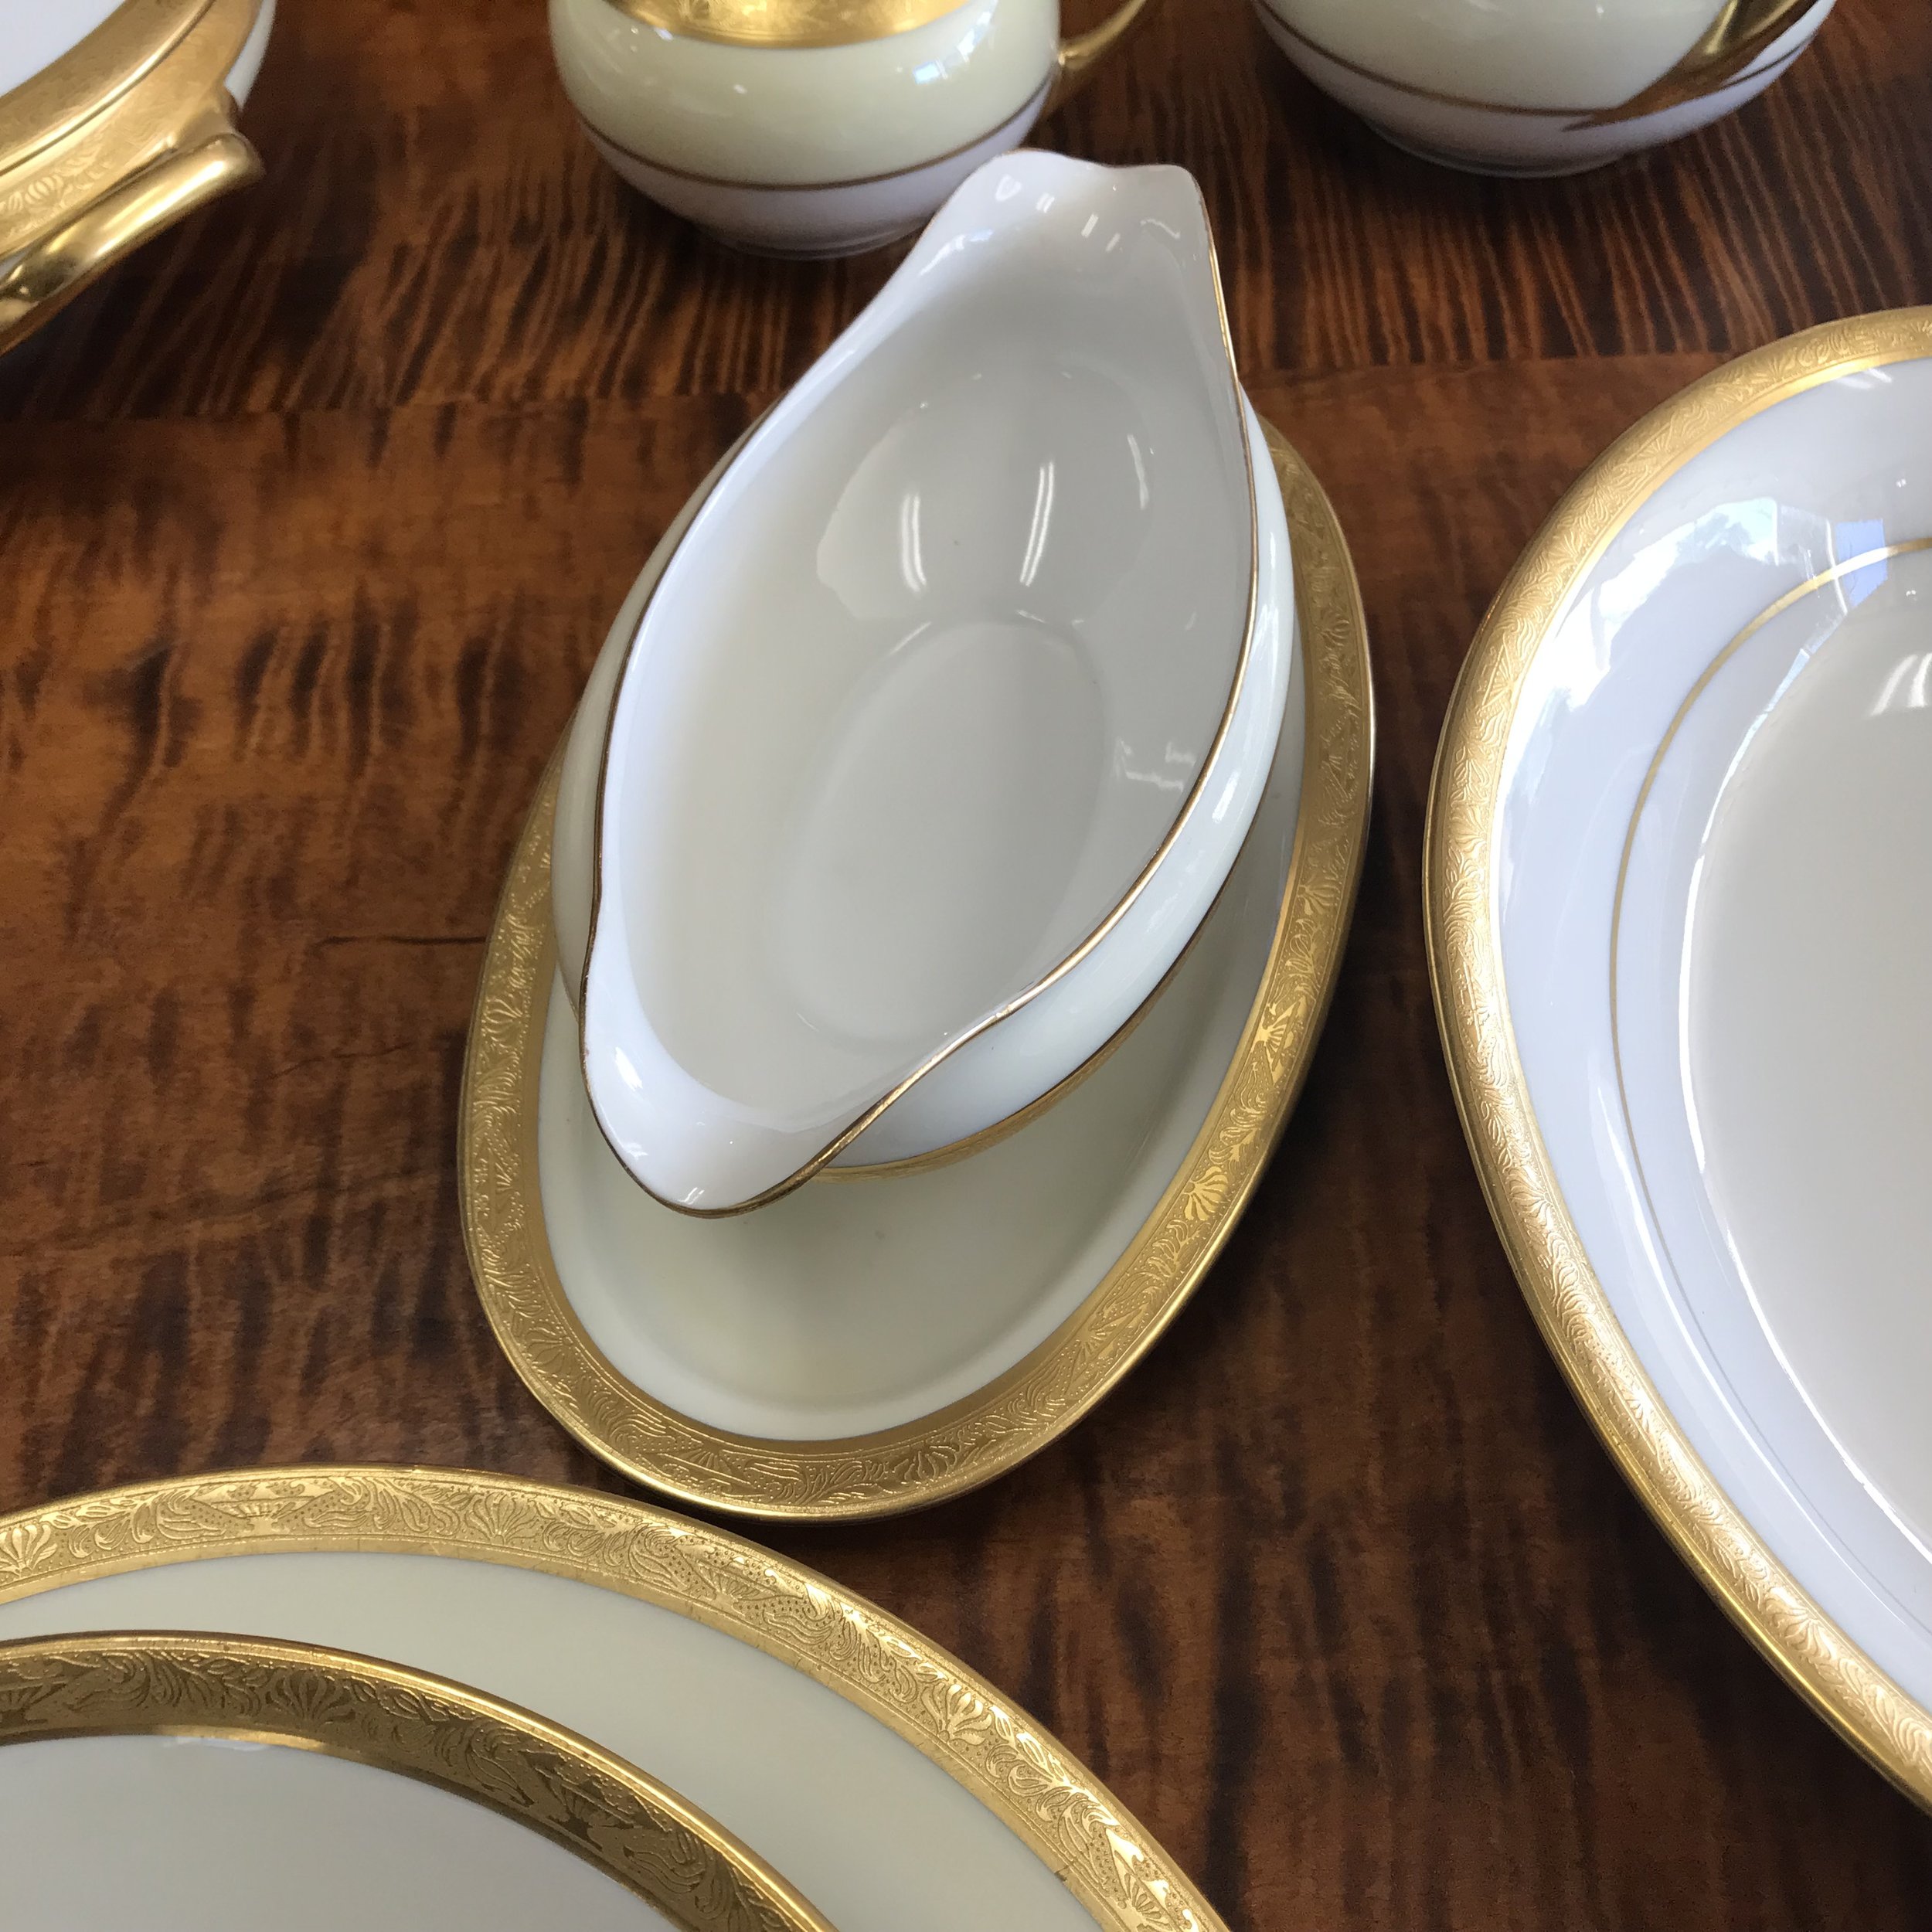 Setting 2 Ardesh 10 7 — Bavaria Gold Tone Encrusted for +extra Porcelain Hutschenreuther Place